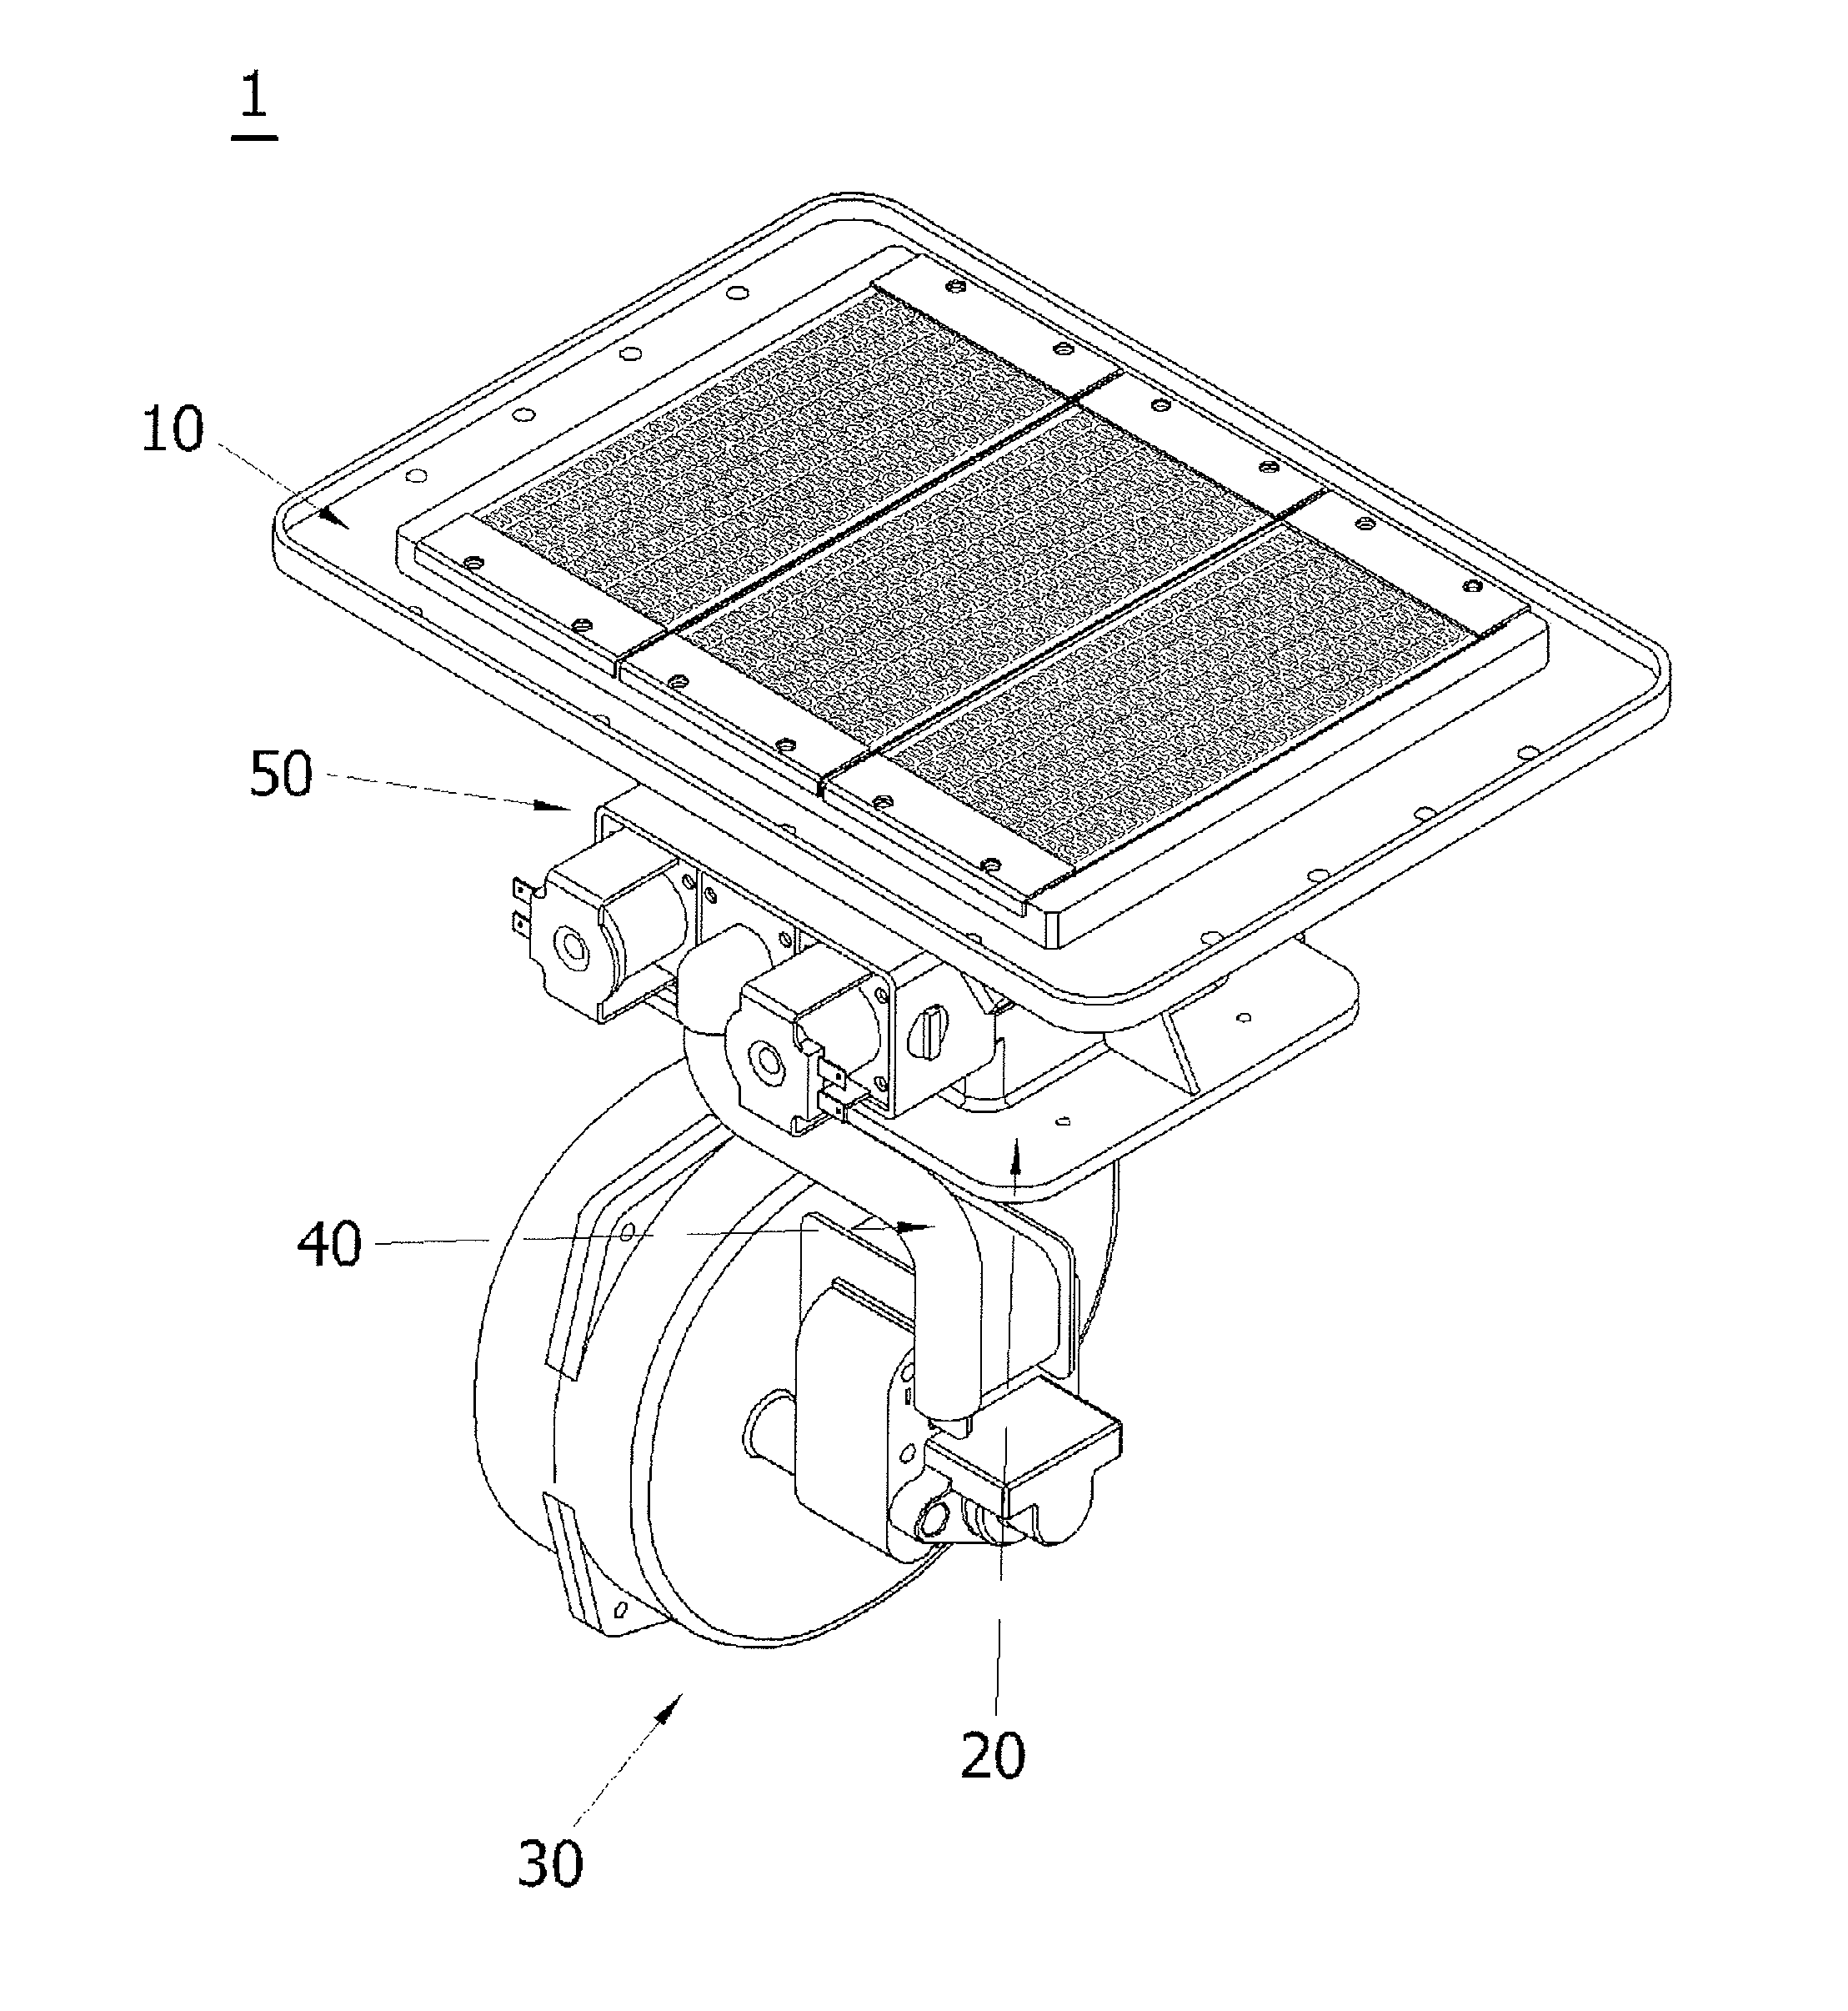 Flame hole unit structure of a gas burner